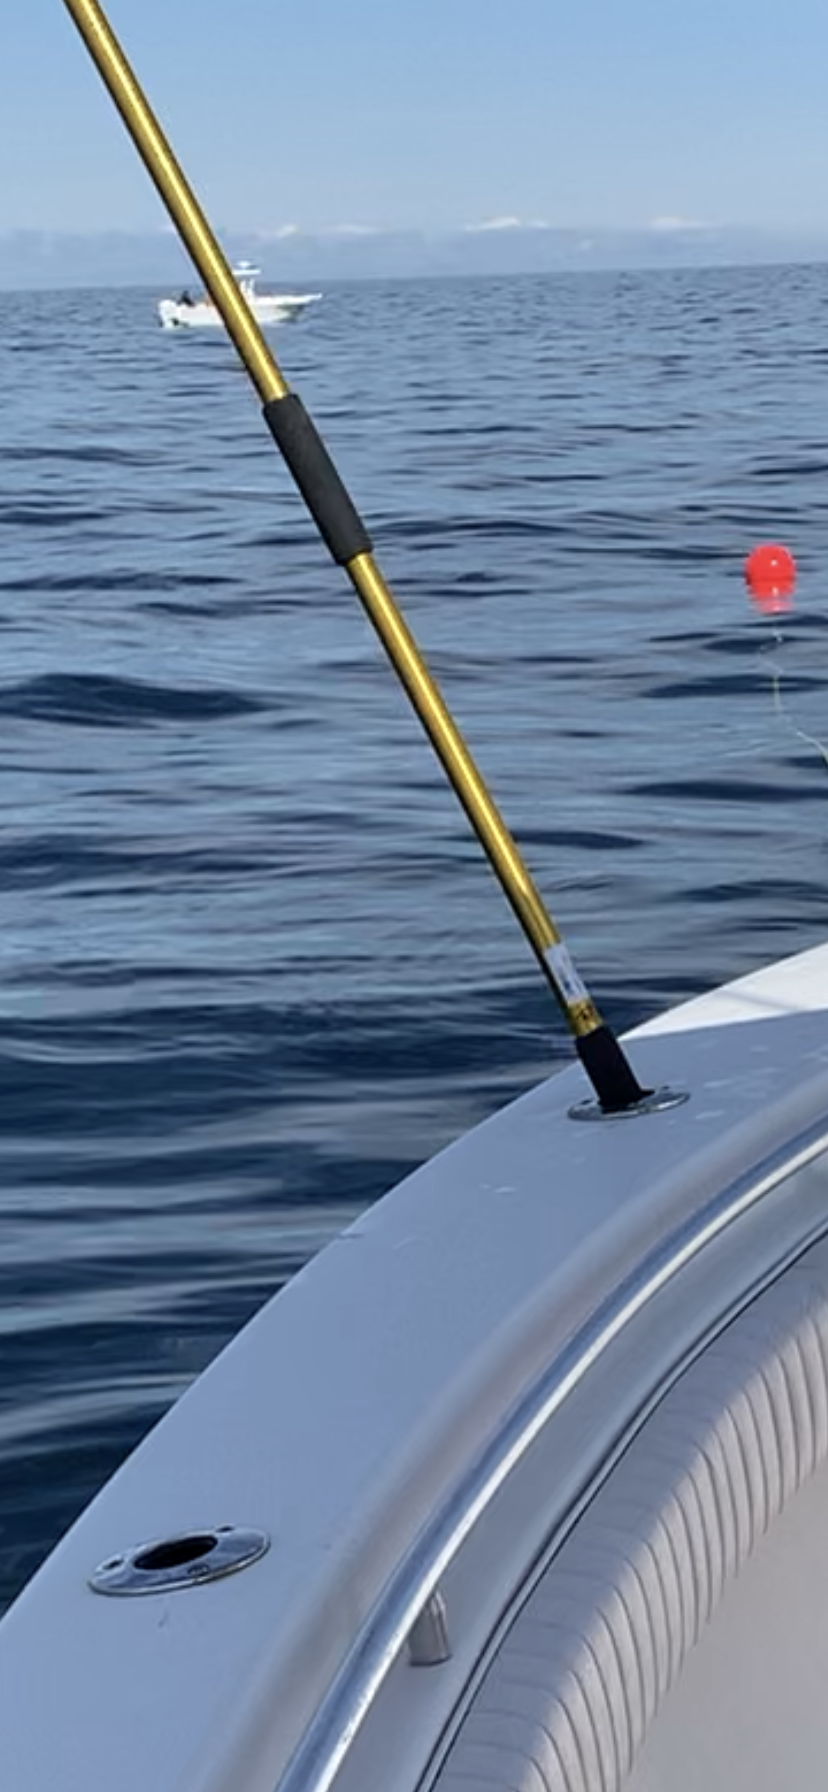 How much room offshore do you give guys on anchor? - The Hull Truth -  Boating and Fishing Forum